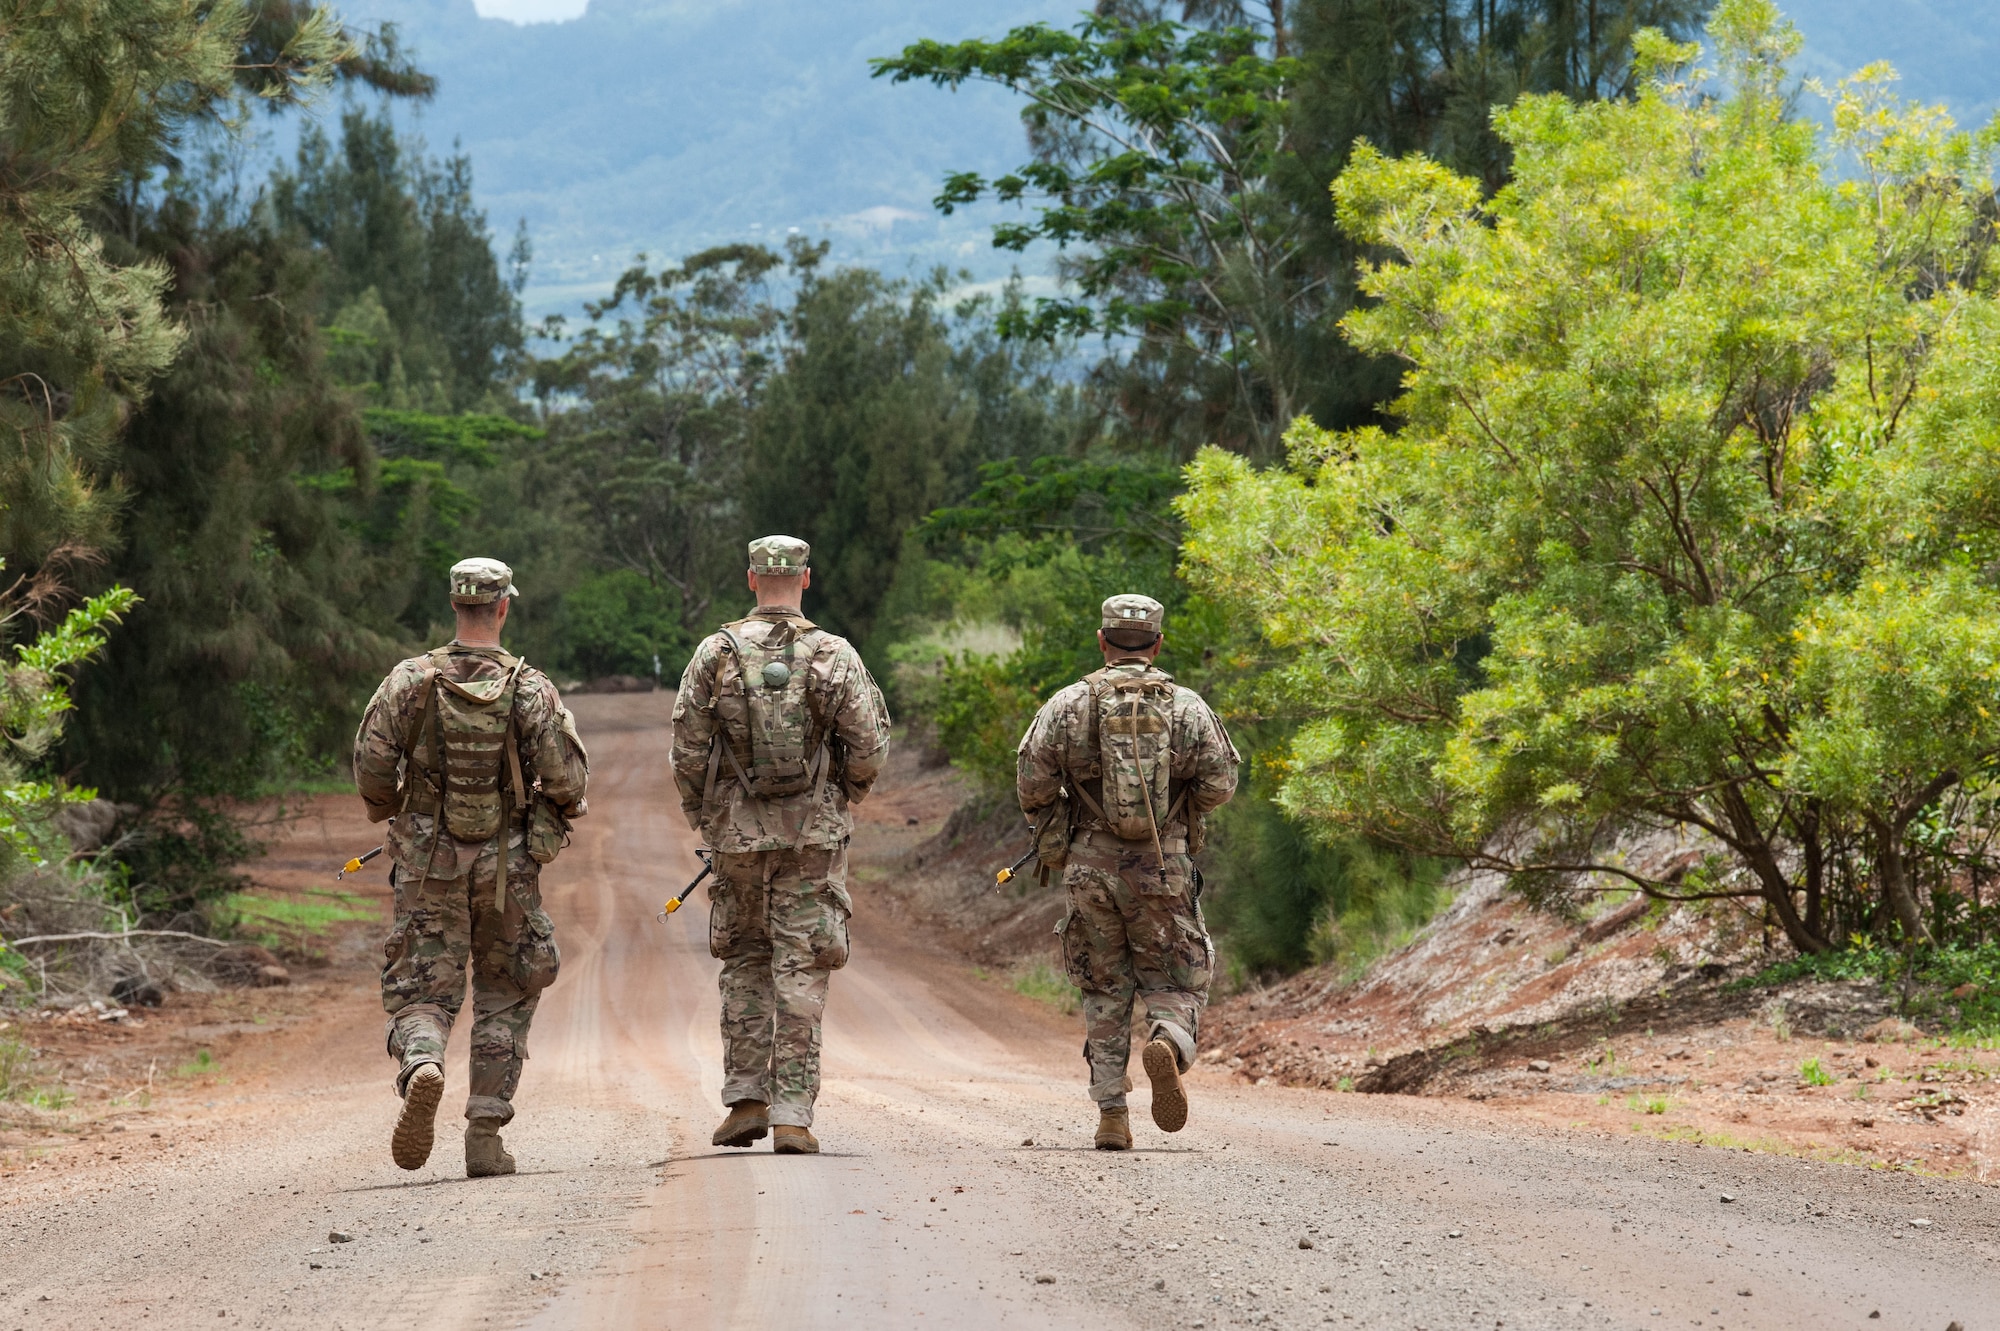 1st Lt. Austin Hoover, Tech. Sgt. Alexander Morley, and Staff Sgt. Jose Obregon, Ranger Assessment Course students, conduct land navigation during as one of their first tasks during the Ranger Assessment Course near Schofield Barracks, Oahu, Hawaii, May 13, 2019. The purpose of the 19-day course is to prepare, assess and evaluate Air Force candidates for Army Ranger School. The Airmen who pass the RAC gain more than a ticket into Ranger School and knowledge on Army tactics – they learn to lead. (U.S. Air Force photo by Staff Sgt. Hailey Haux)